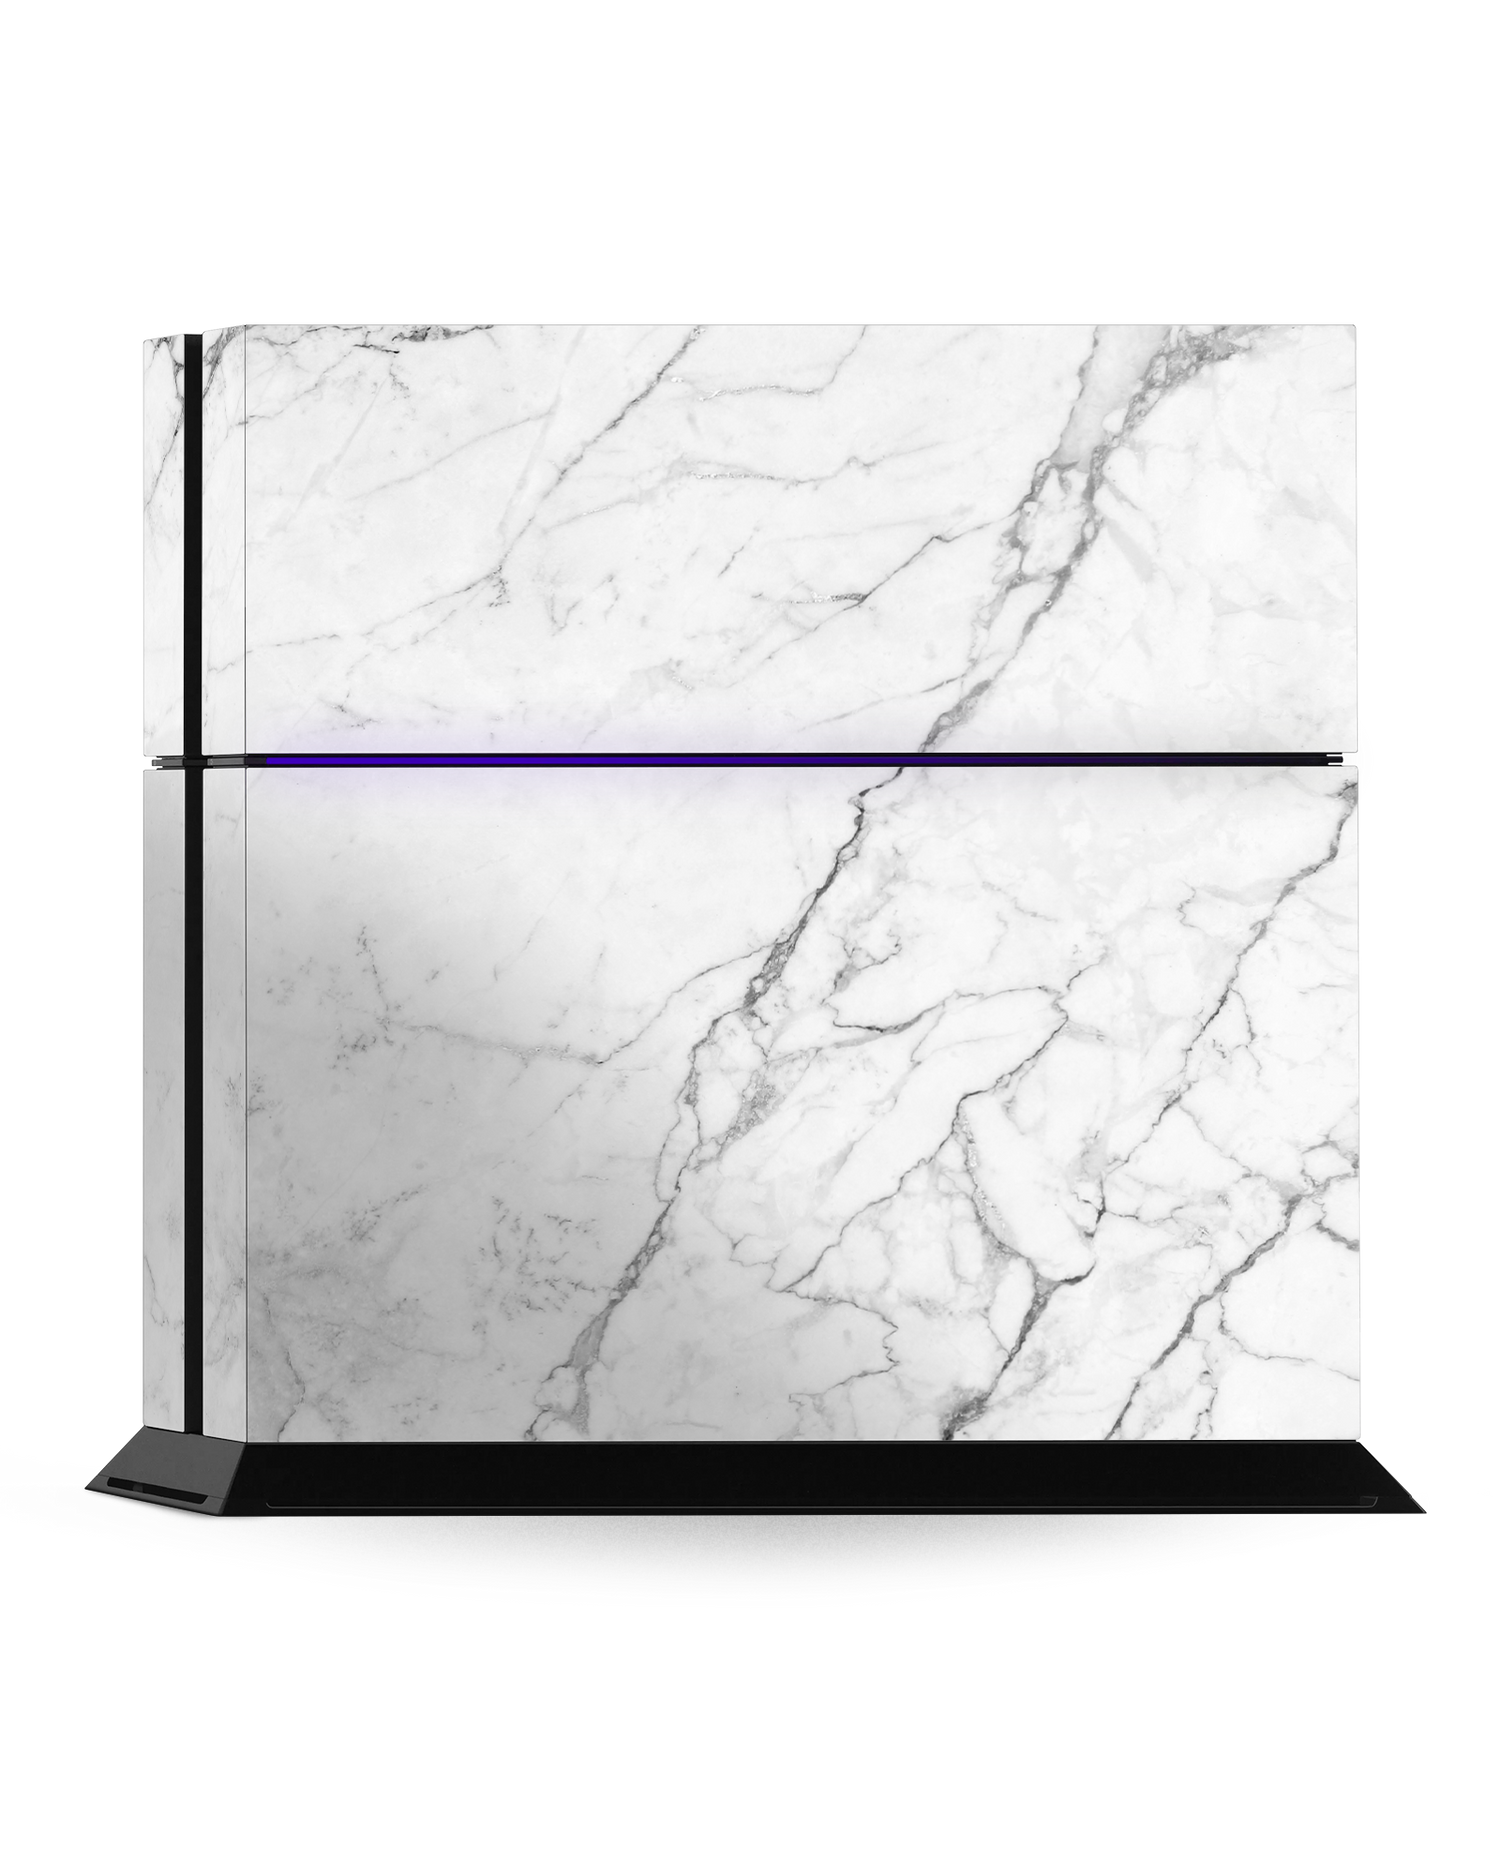 White Marble Console Skin for Sony PlayStation 4: Standing